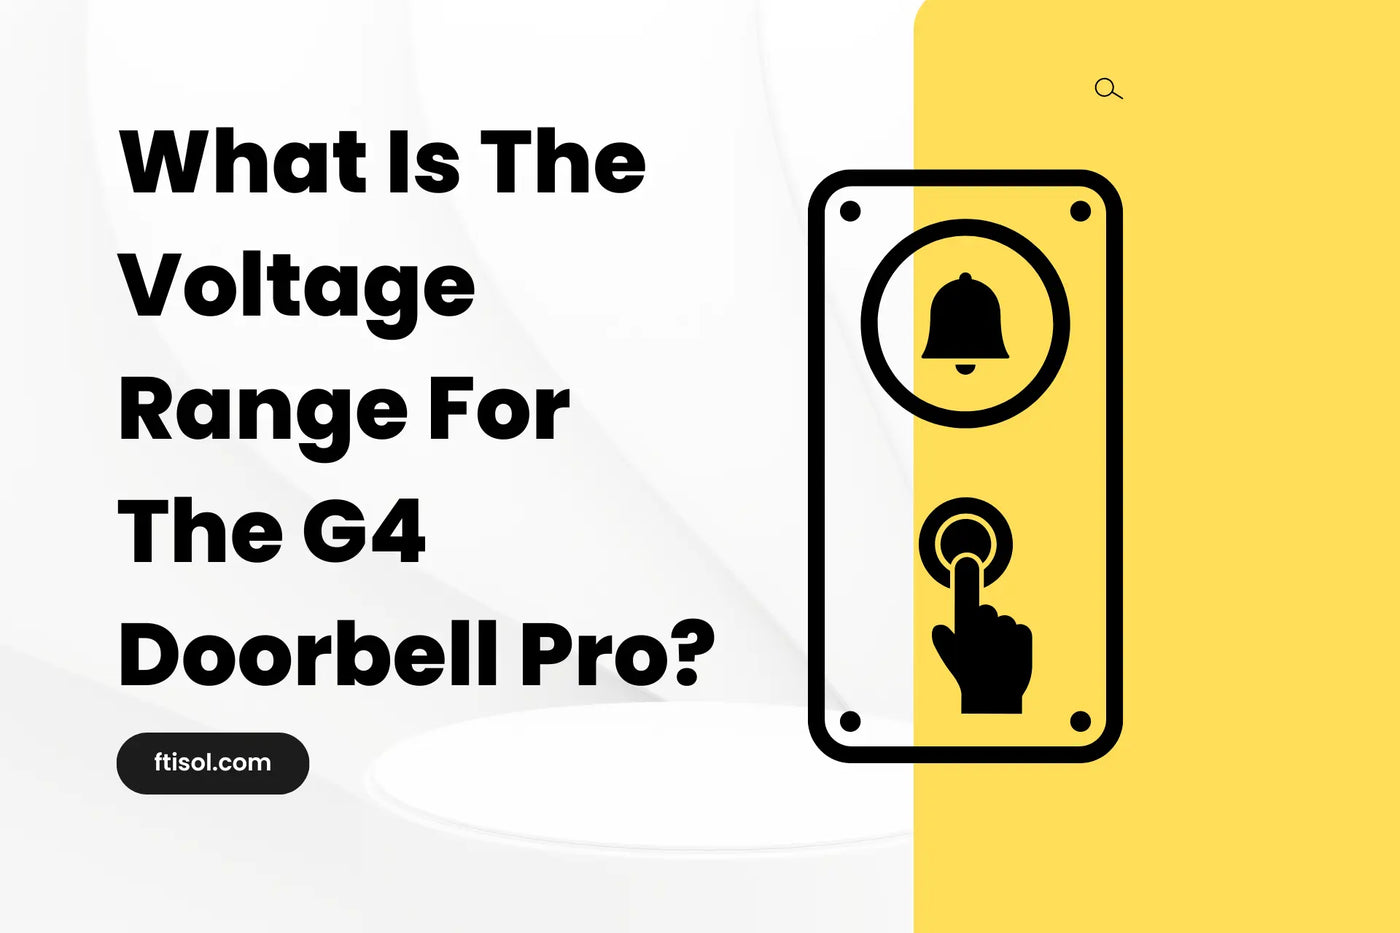 What Is The Voltage Range For The G4 Doorbell Pro?